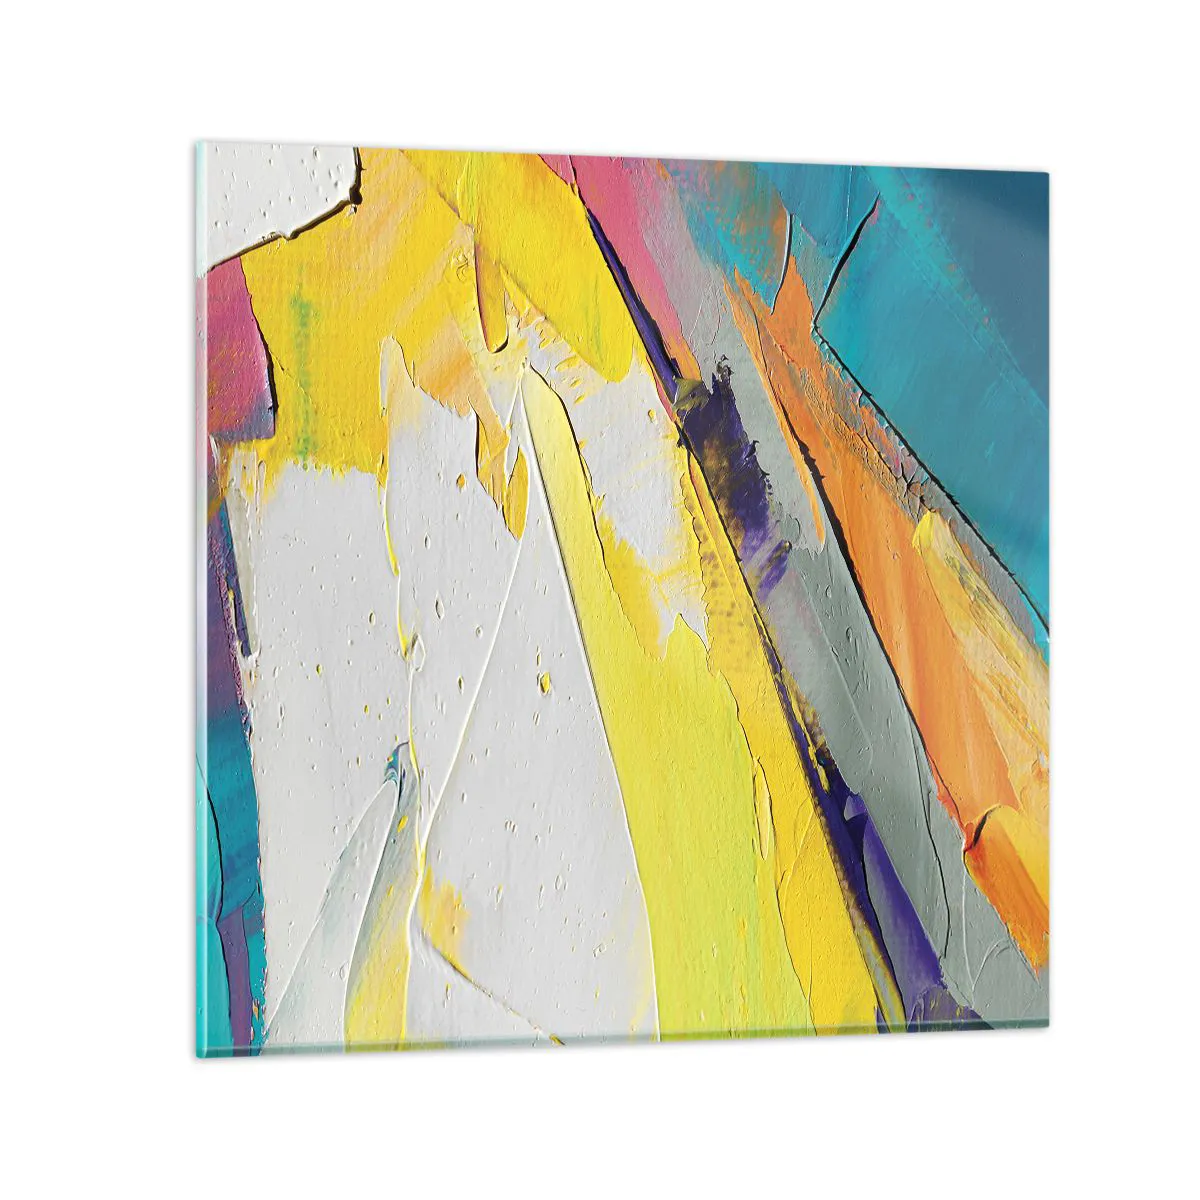 Glass picture  Arttor 70x70 cm - Anatomy of Light - Abstraction, Art, 3D, Painting, Modern Art, For living-room, For bedroom, White, Black, Horizontal, Glass, GAC70x70-4871